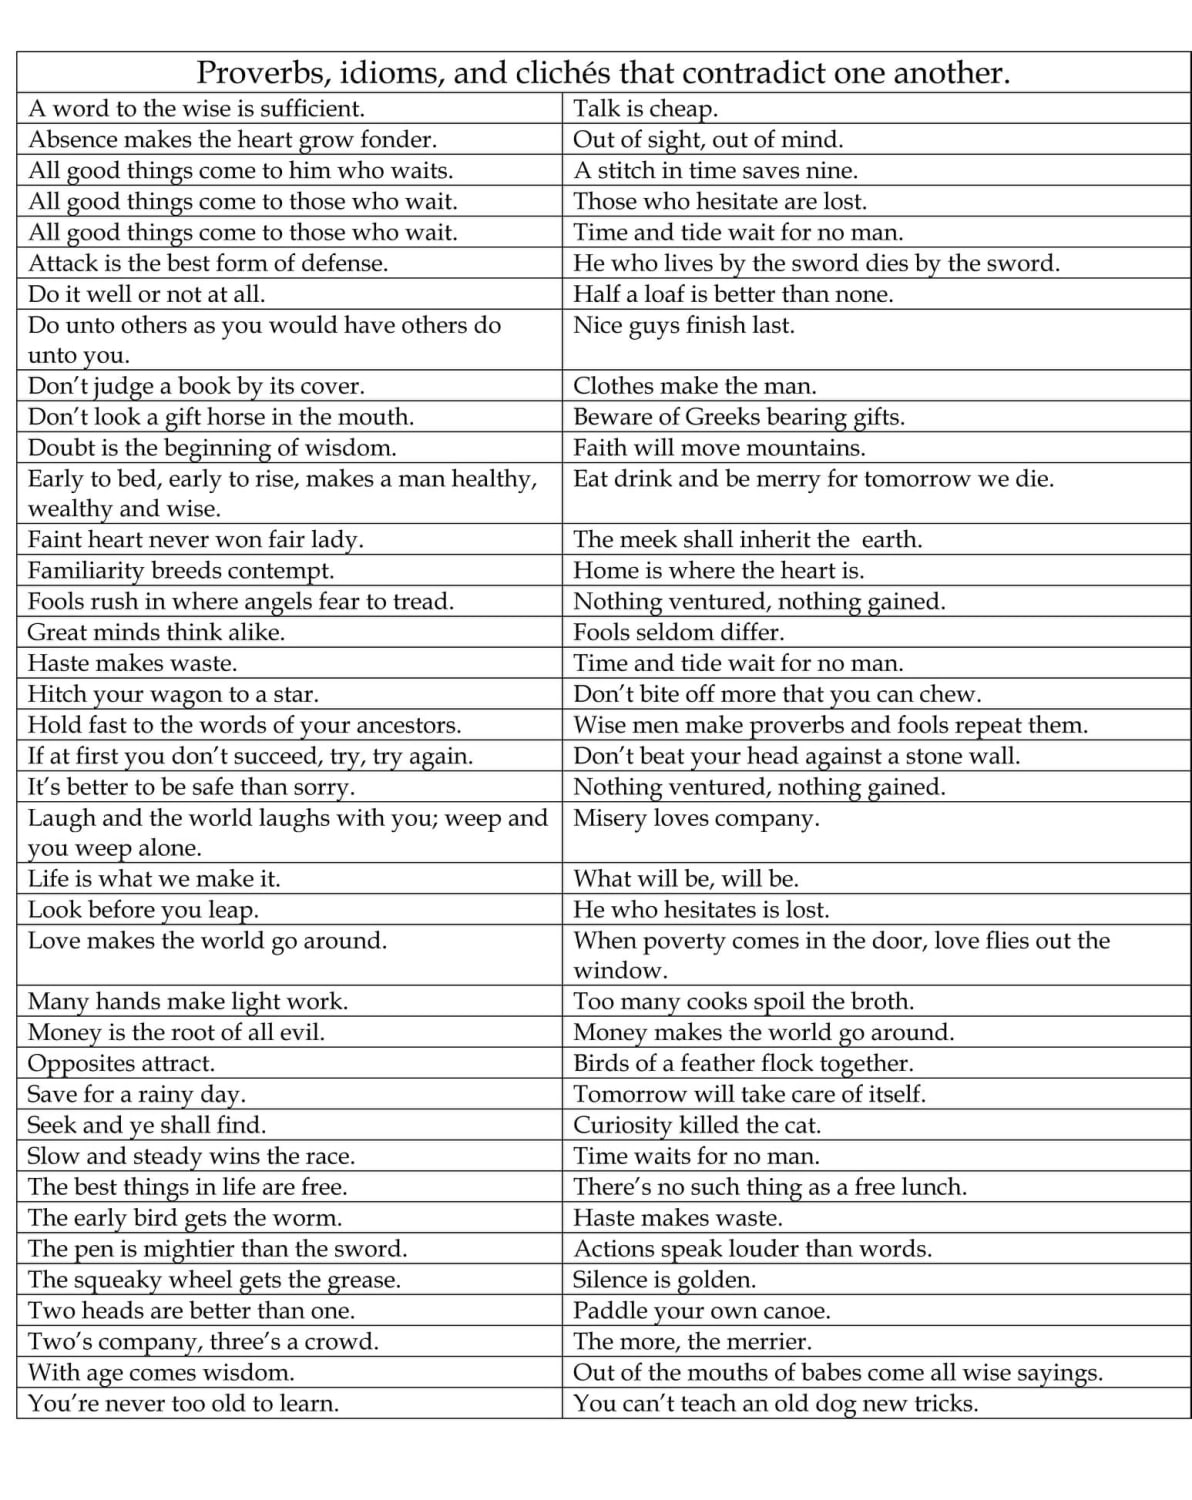 Proverbs, idioms, and clichés that contradict one another. Compiled by my friend.